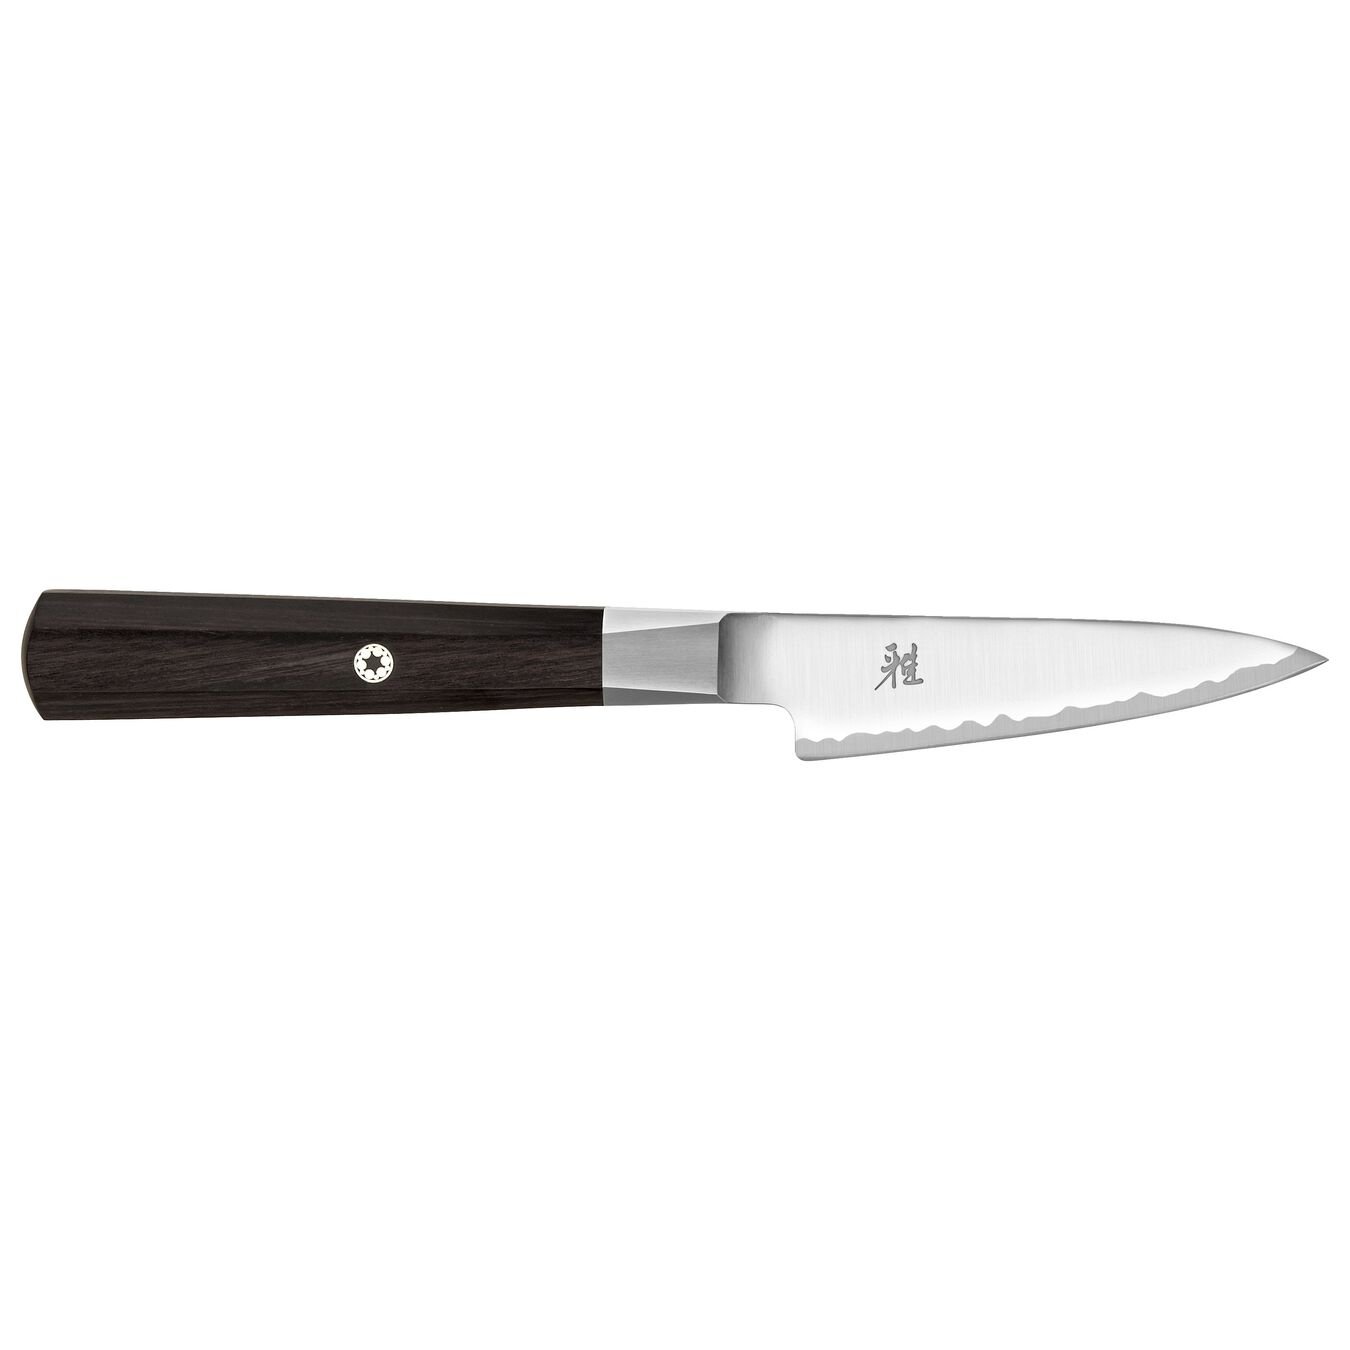 3.5-inch,  Paring Knife,,large 3